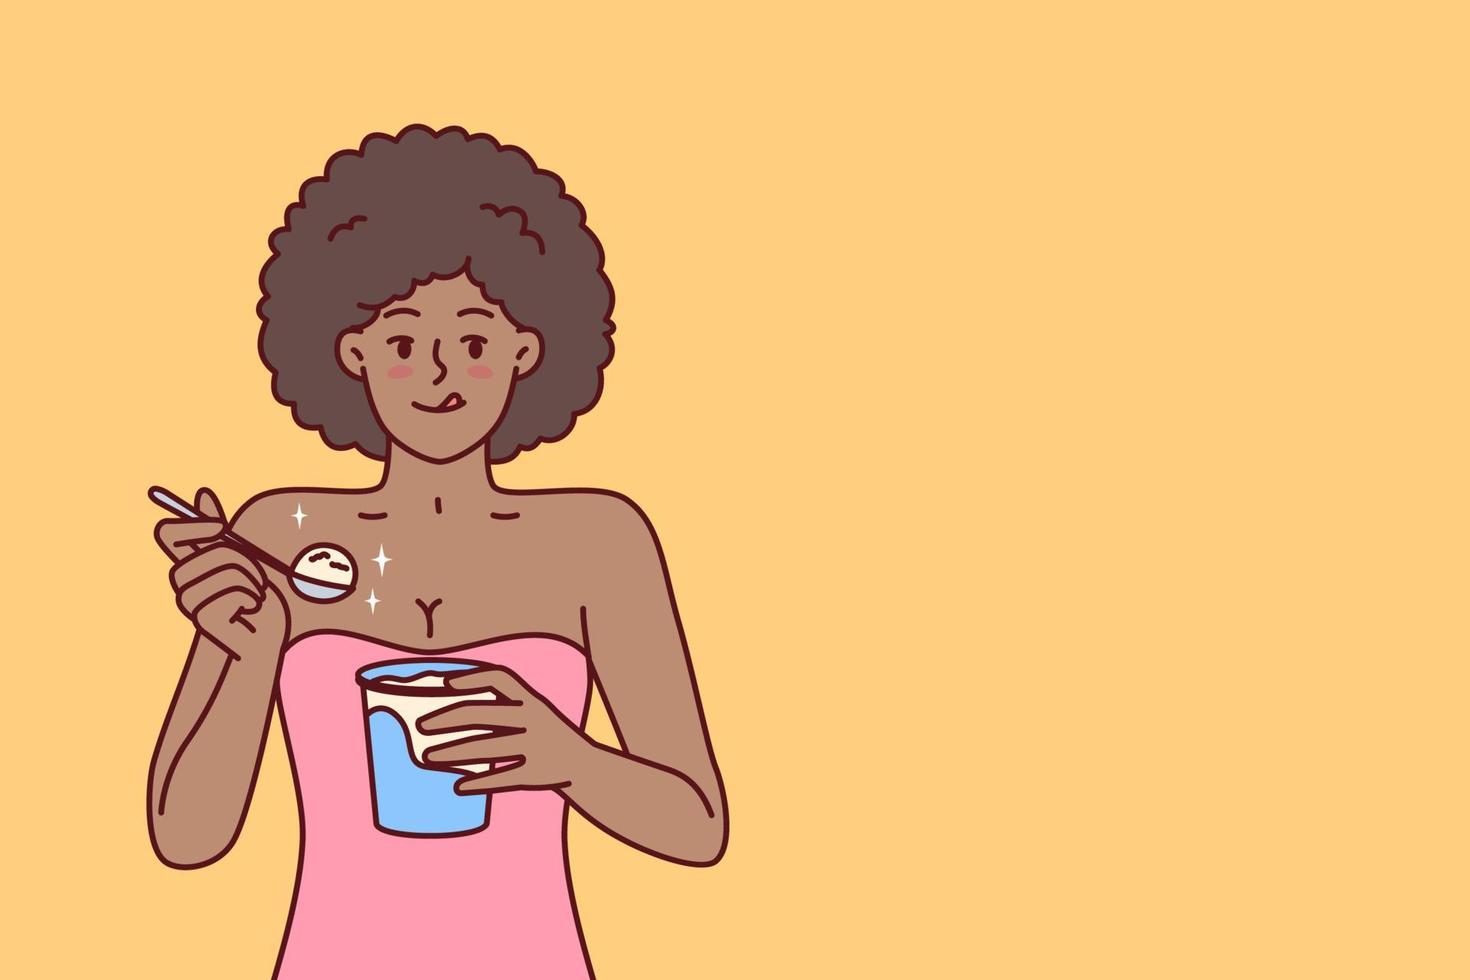 African American woman eating ice cream enjoying cold dessert to cool down after hot walk. Curly ethnic girl with ice cream satisfies hunger and licks lips wanting to be refreshed in summer weather vector